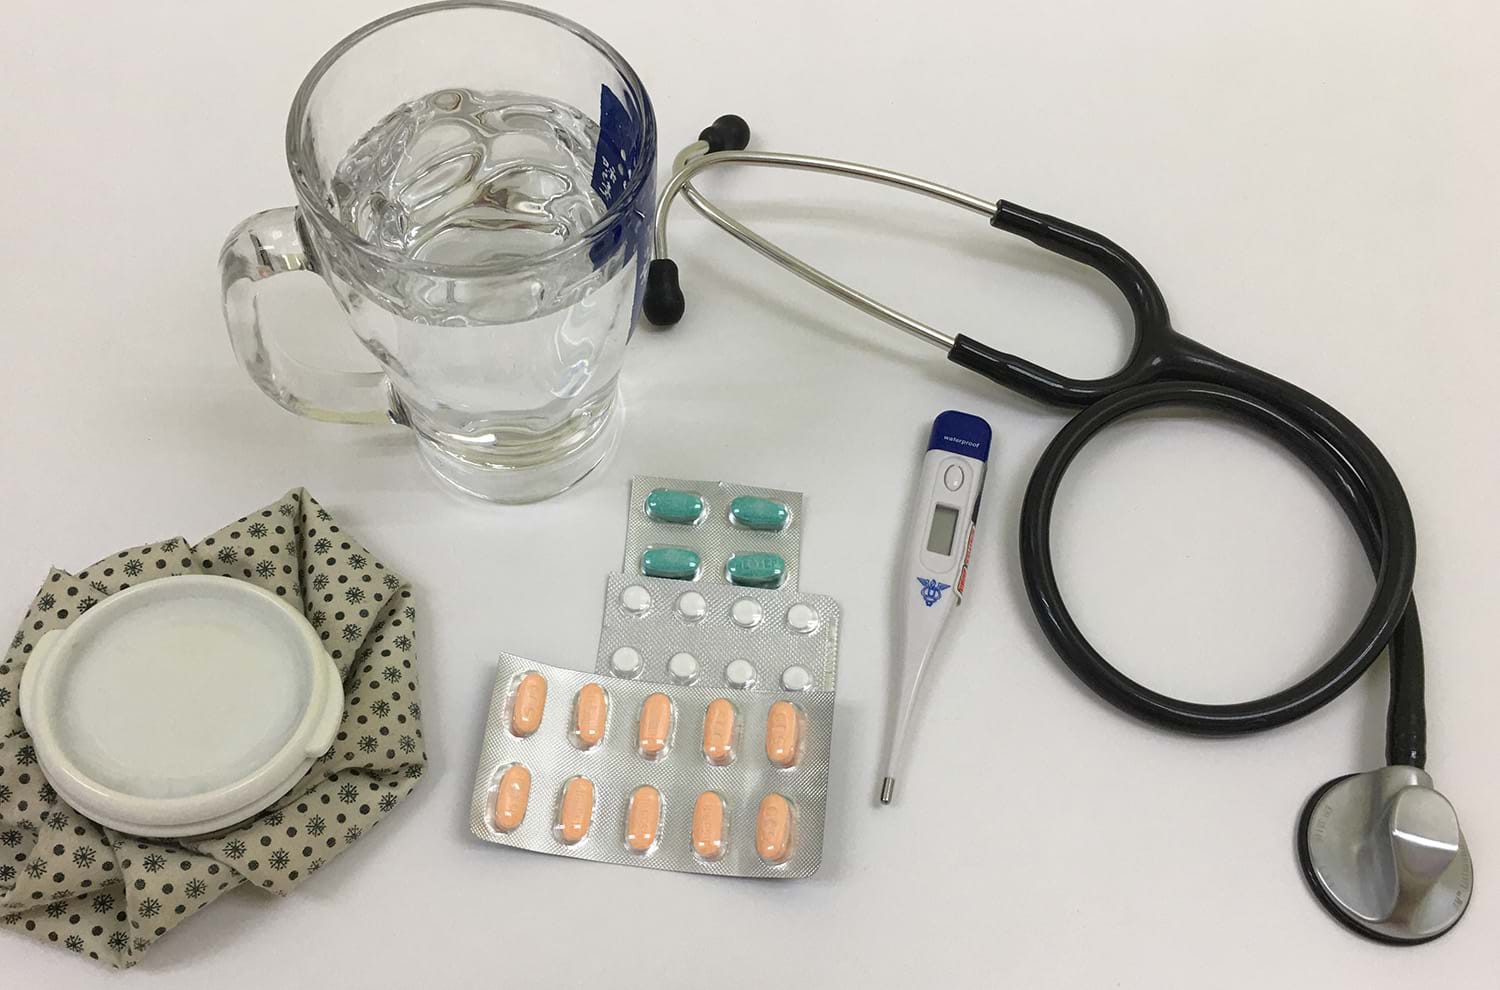 Pills, thermometer, and other medical items